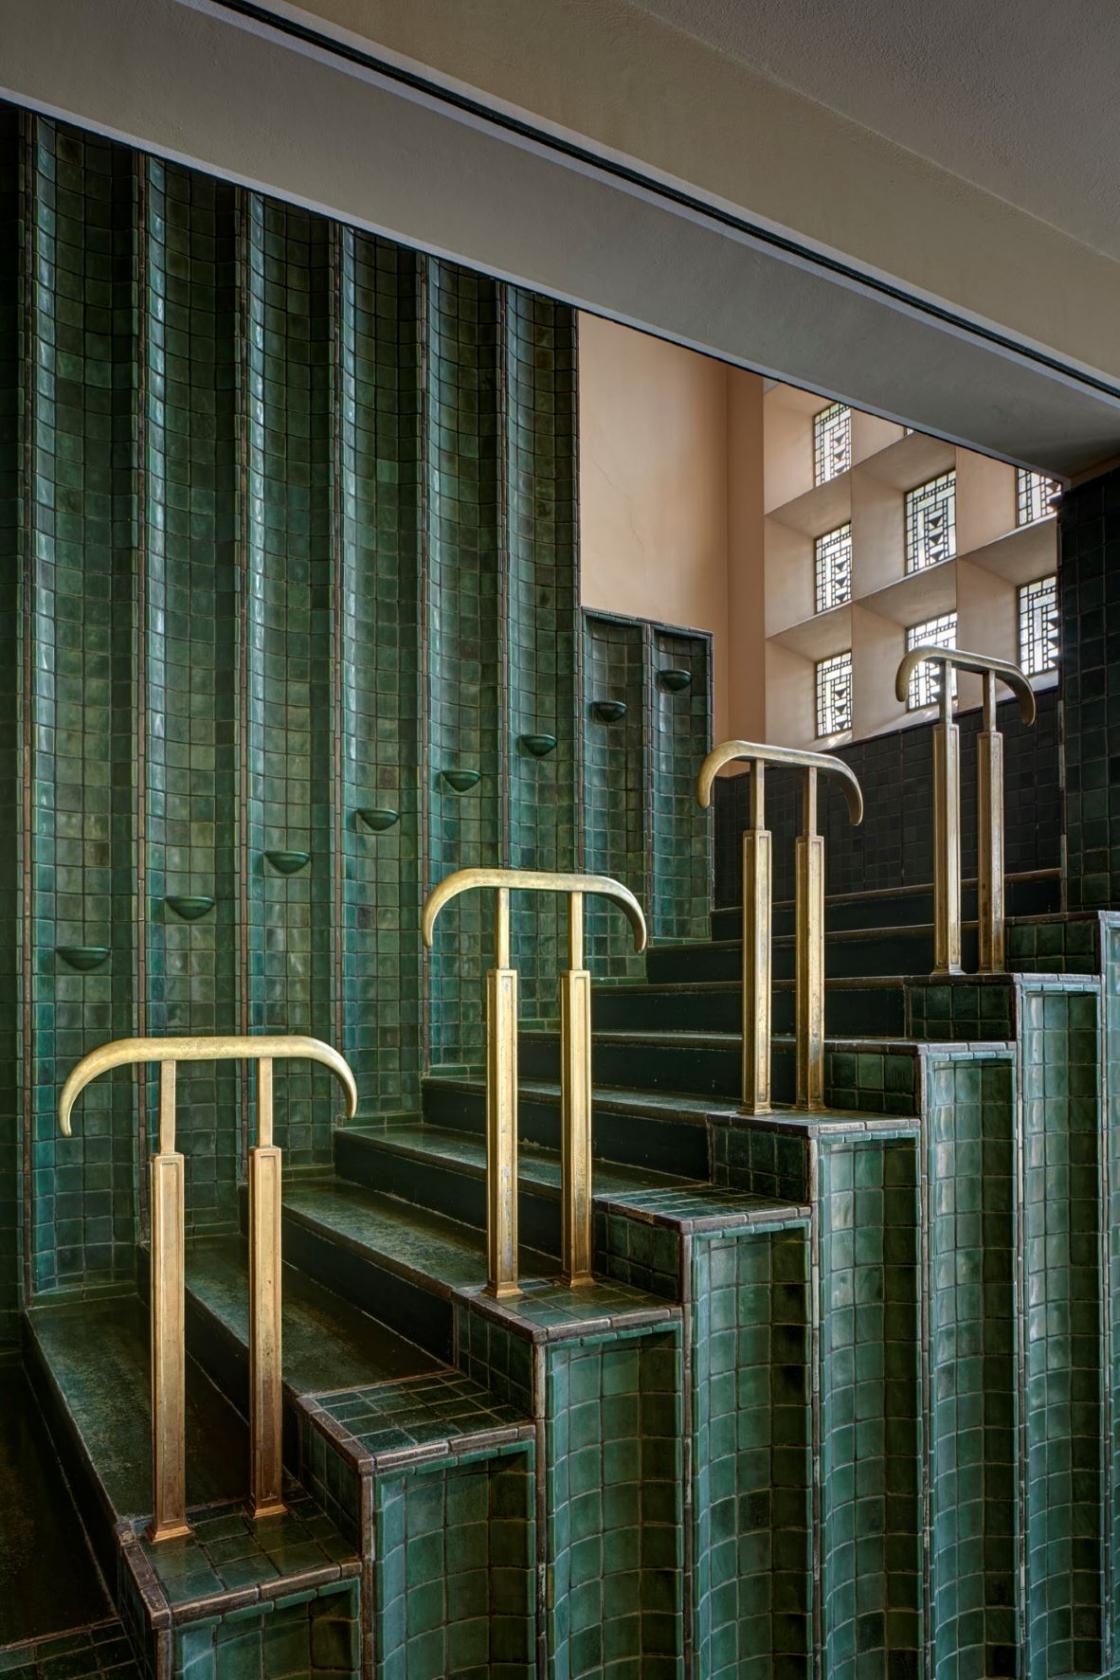 Photograph of the Green Lobby staircase in Kingswood School